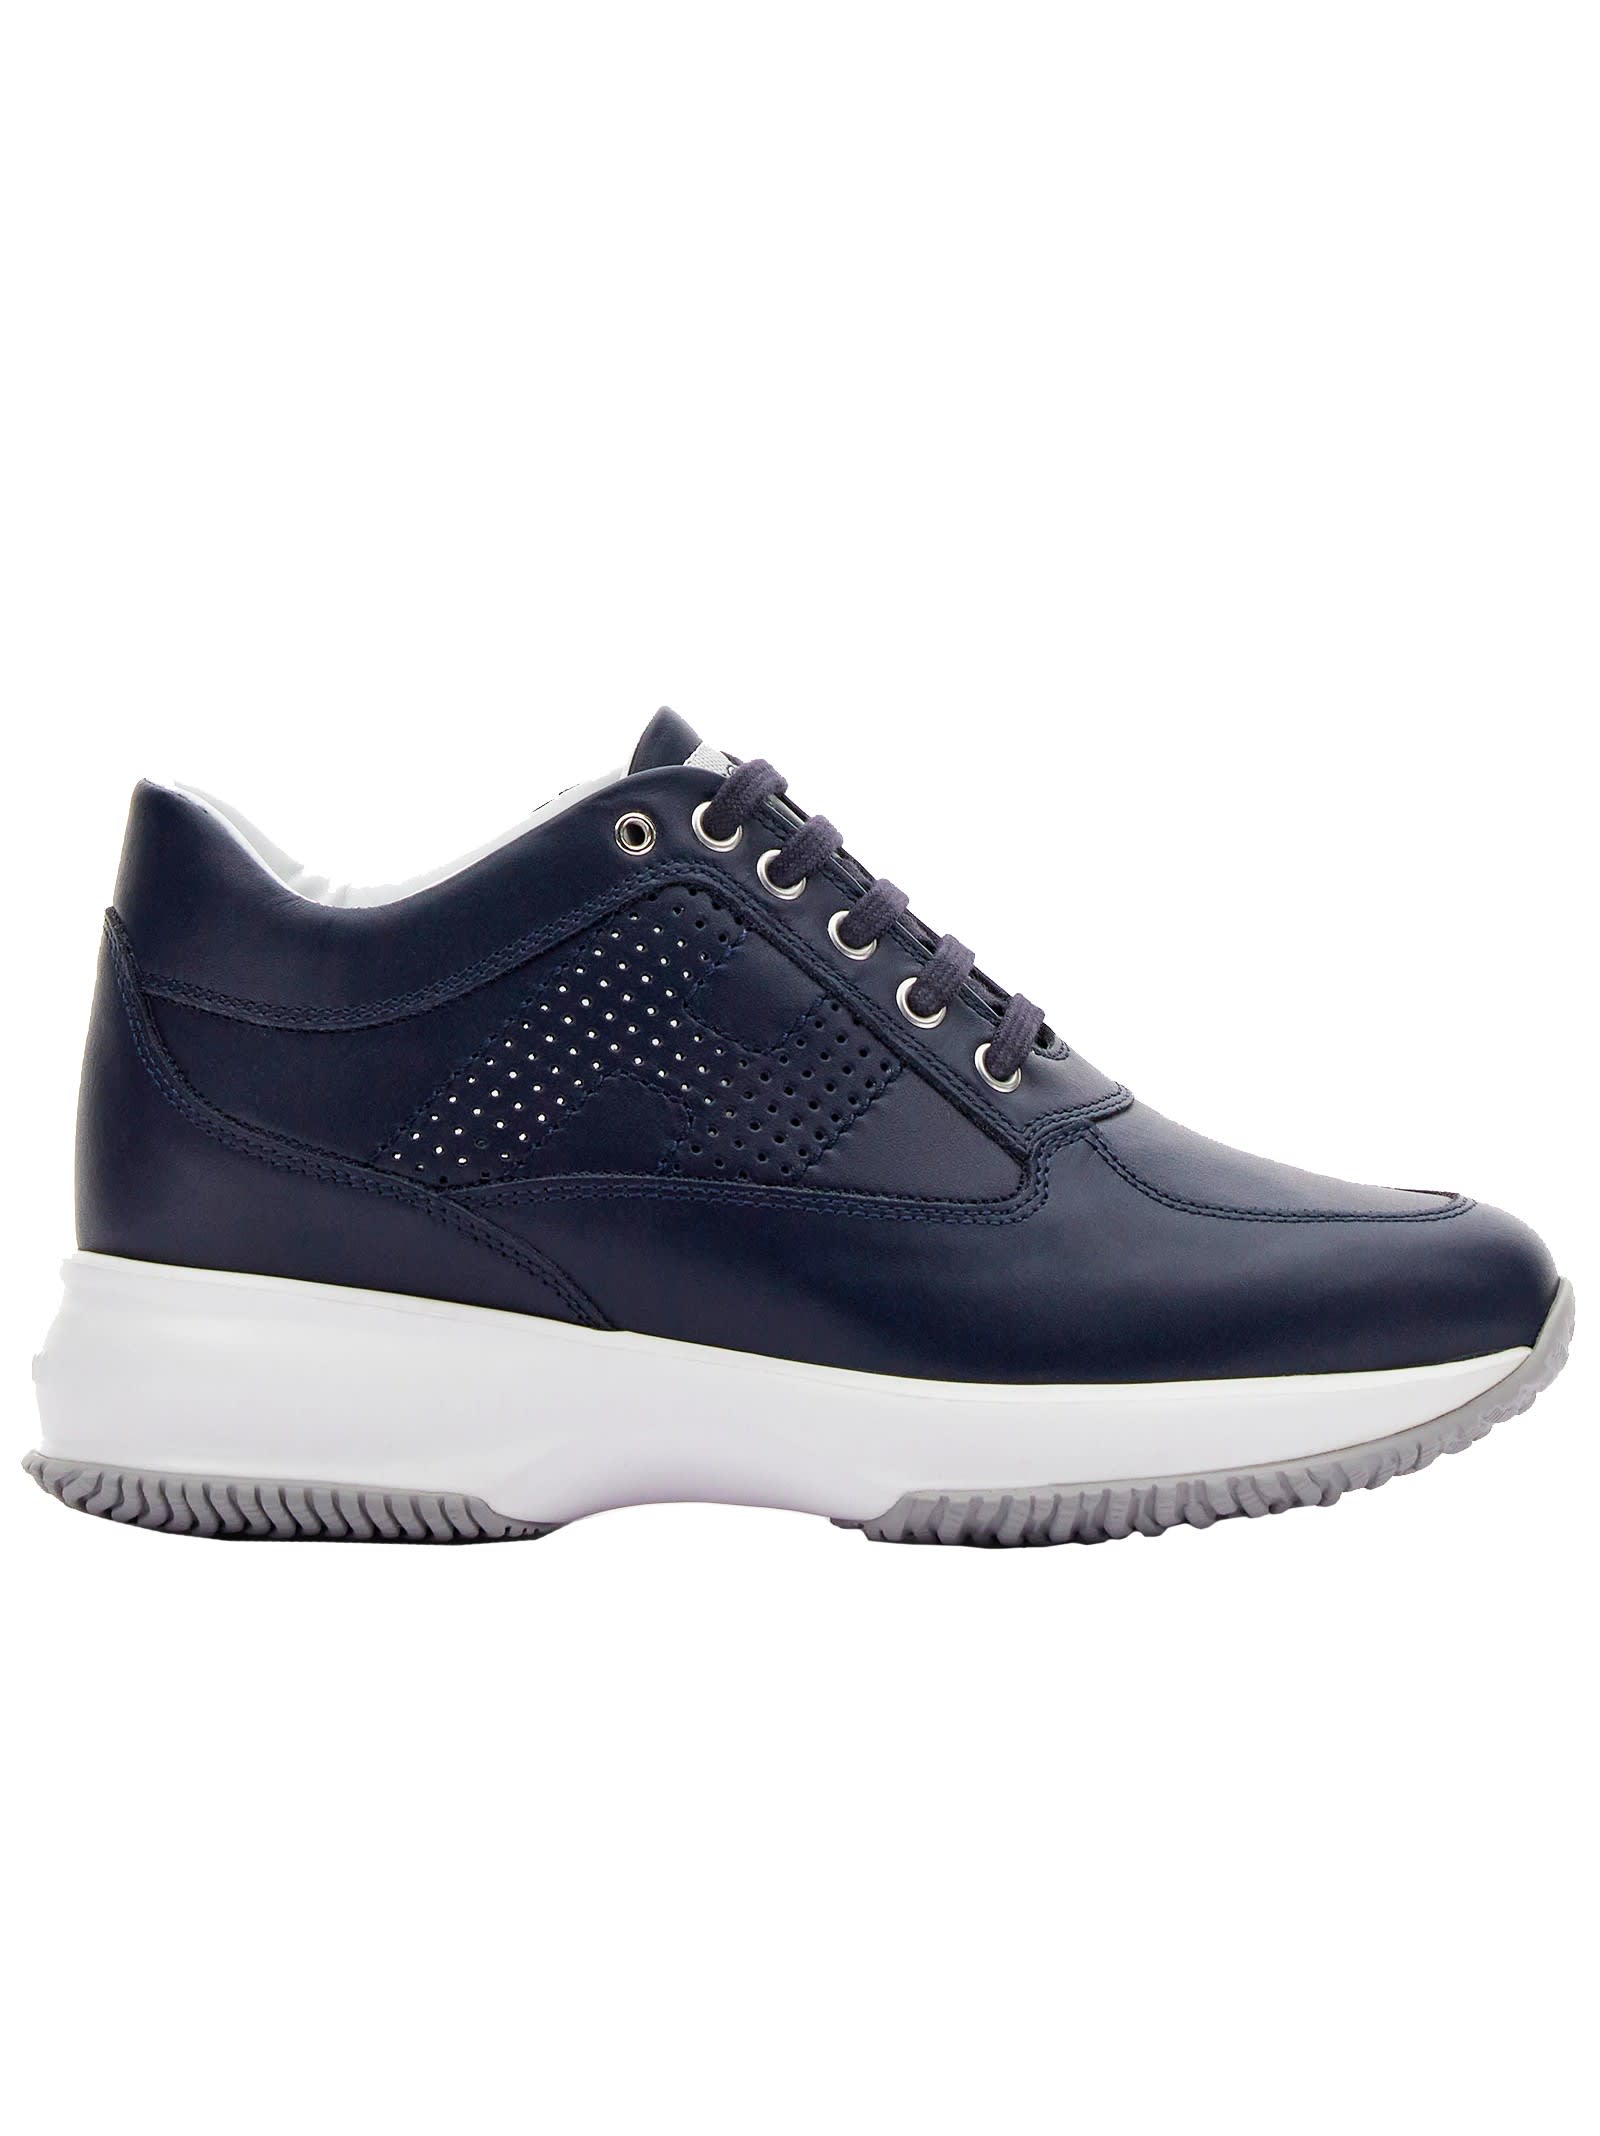 Hogan Blue Leather Interactive Sneakers